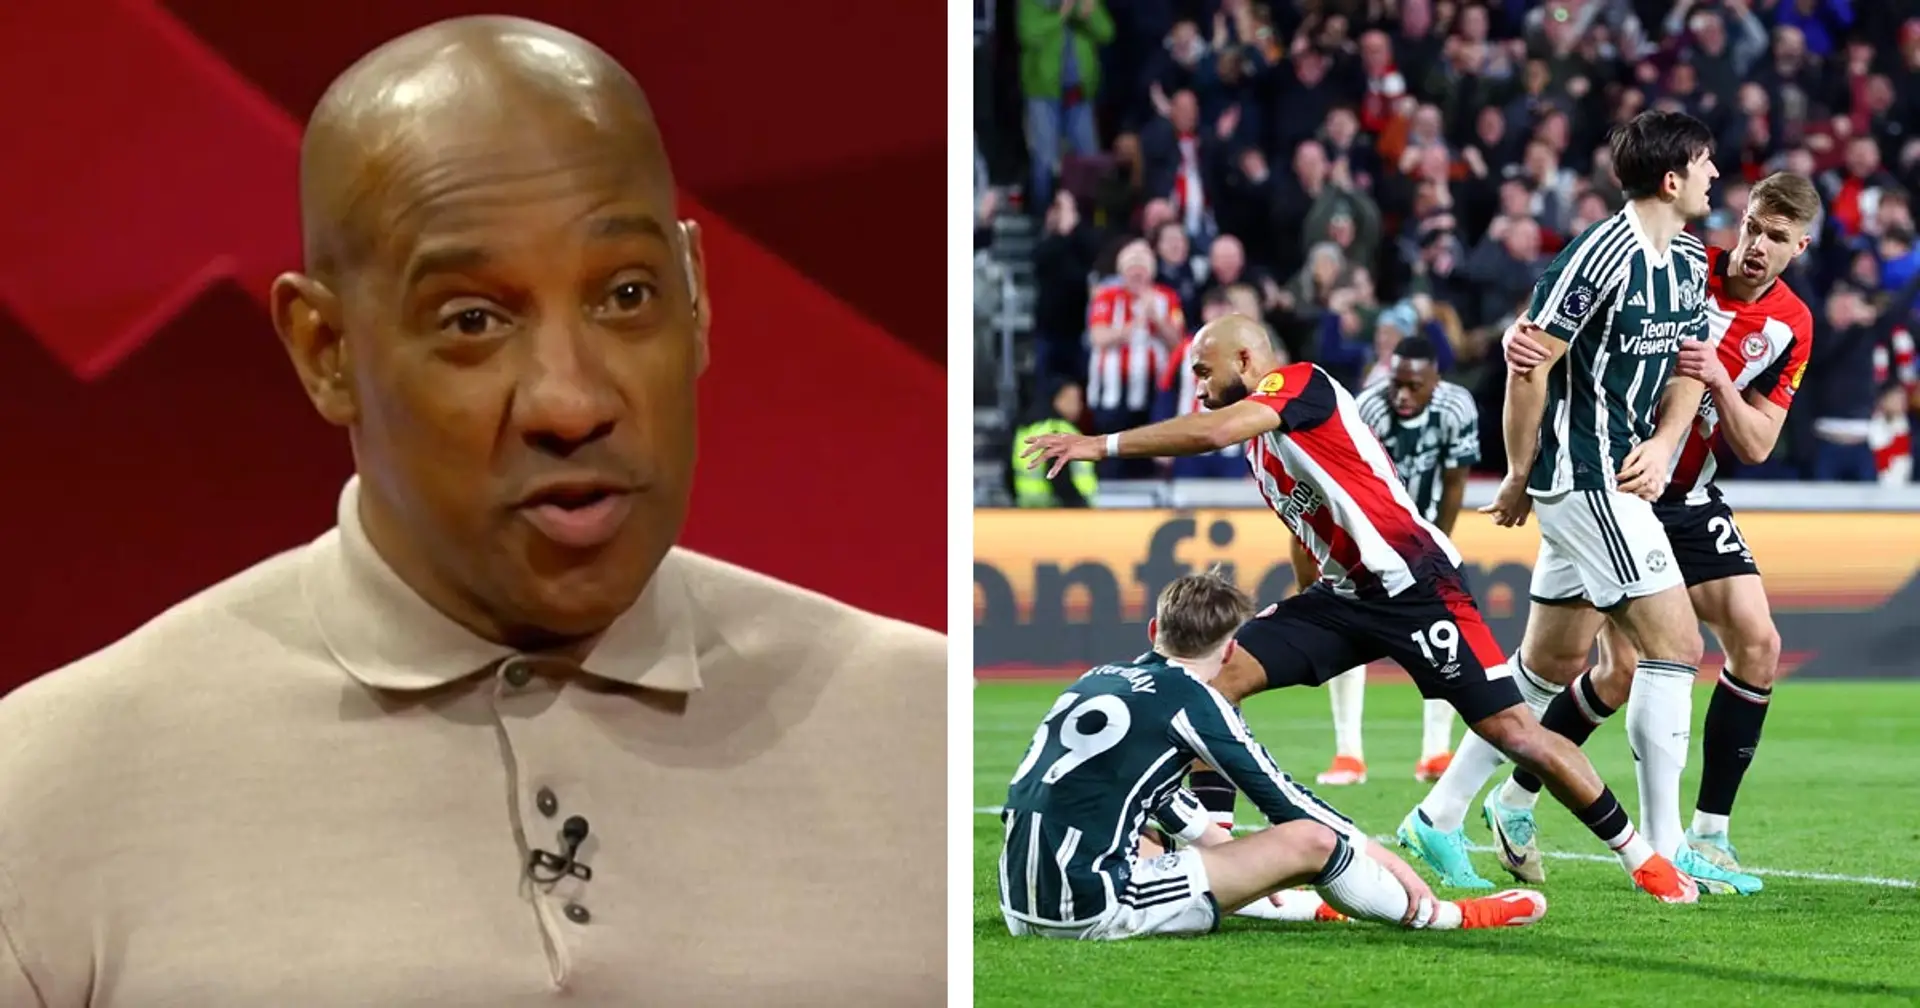 'It's not good enough': Dion Dublin names alarming issue he witnessed in Man United's performance against Brentford